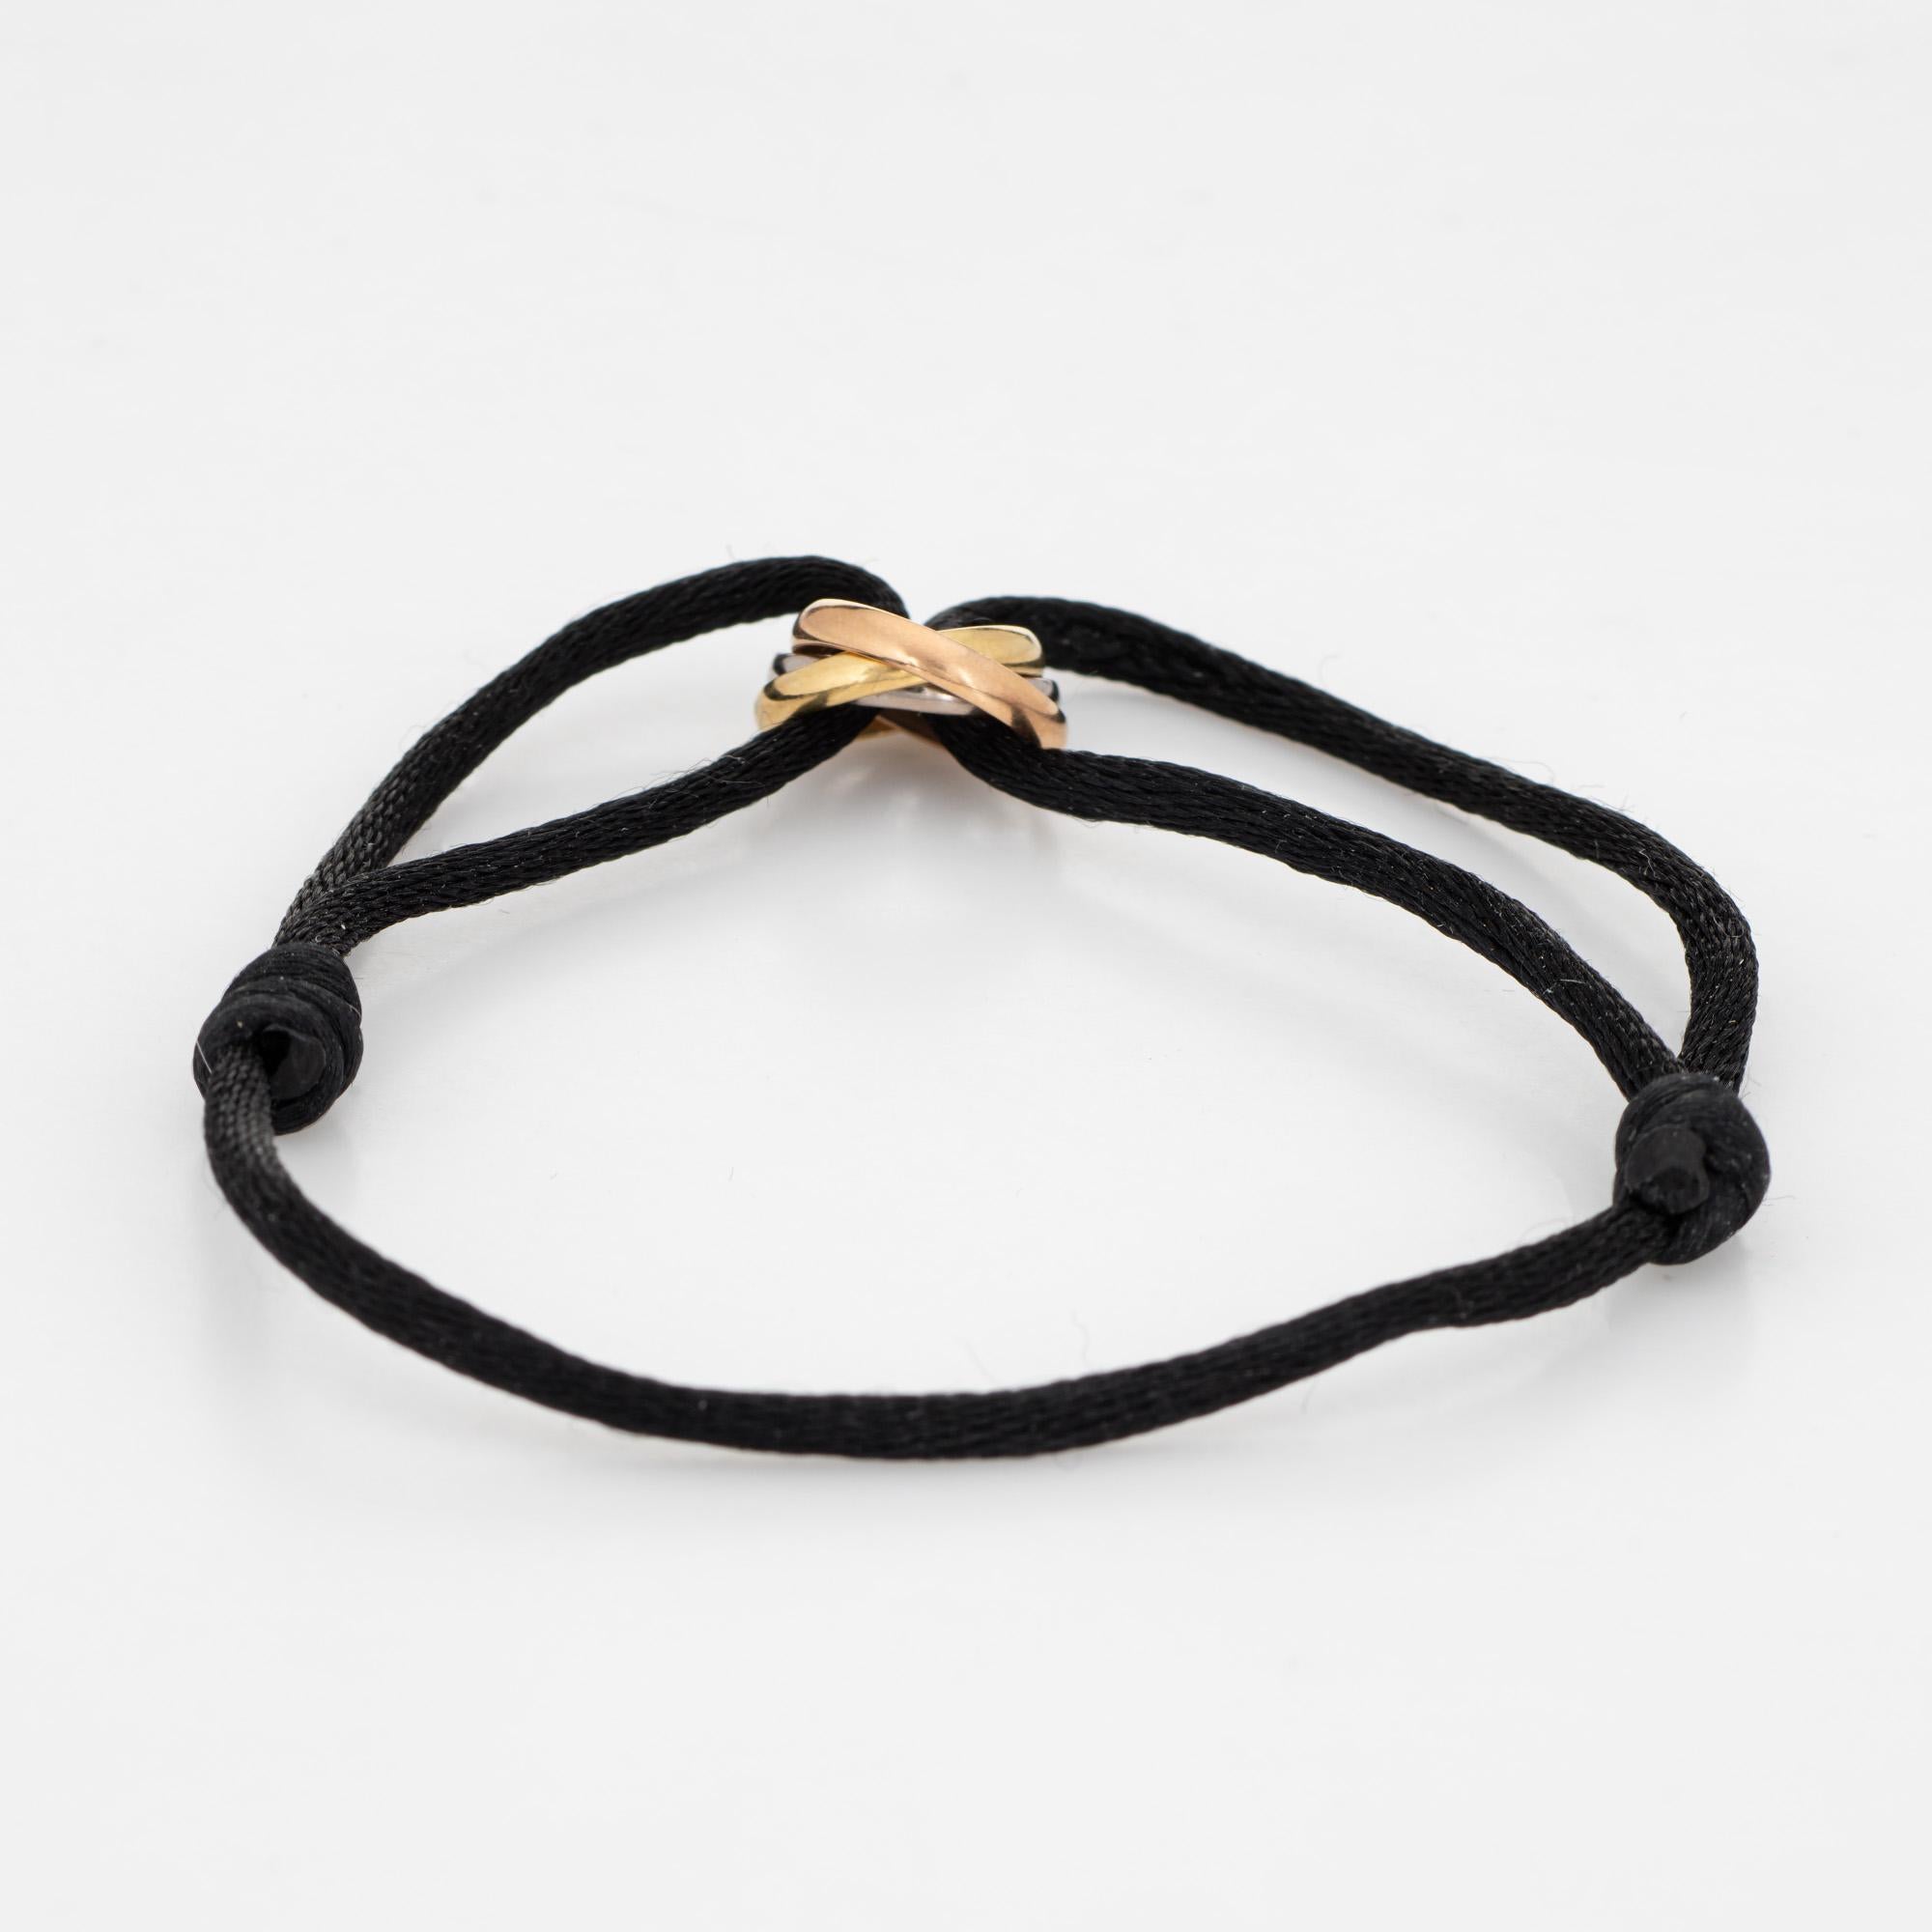 
Estate Cartier Trinity bracelet crafted in 18 karat yellow, rose & white gold.  

Fitted on an adjustable black silk cord with Trinity rings in 18k white, yellow and rose gold. The bracelet is great worn alone or layered with your fine jewelry from